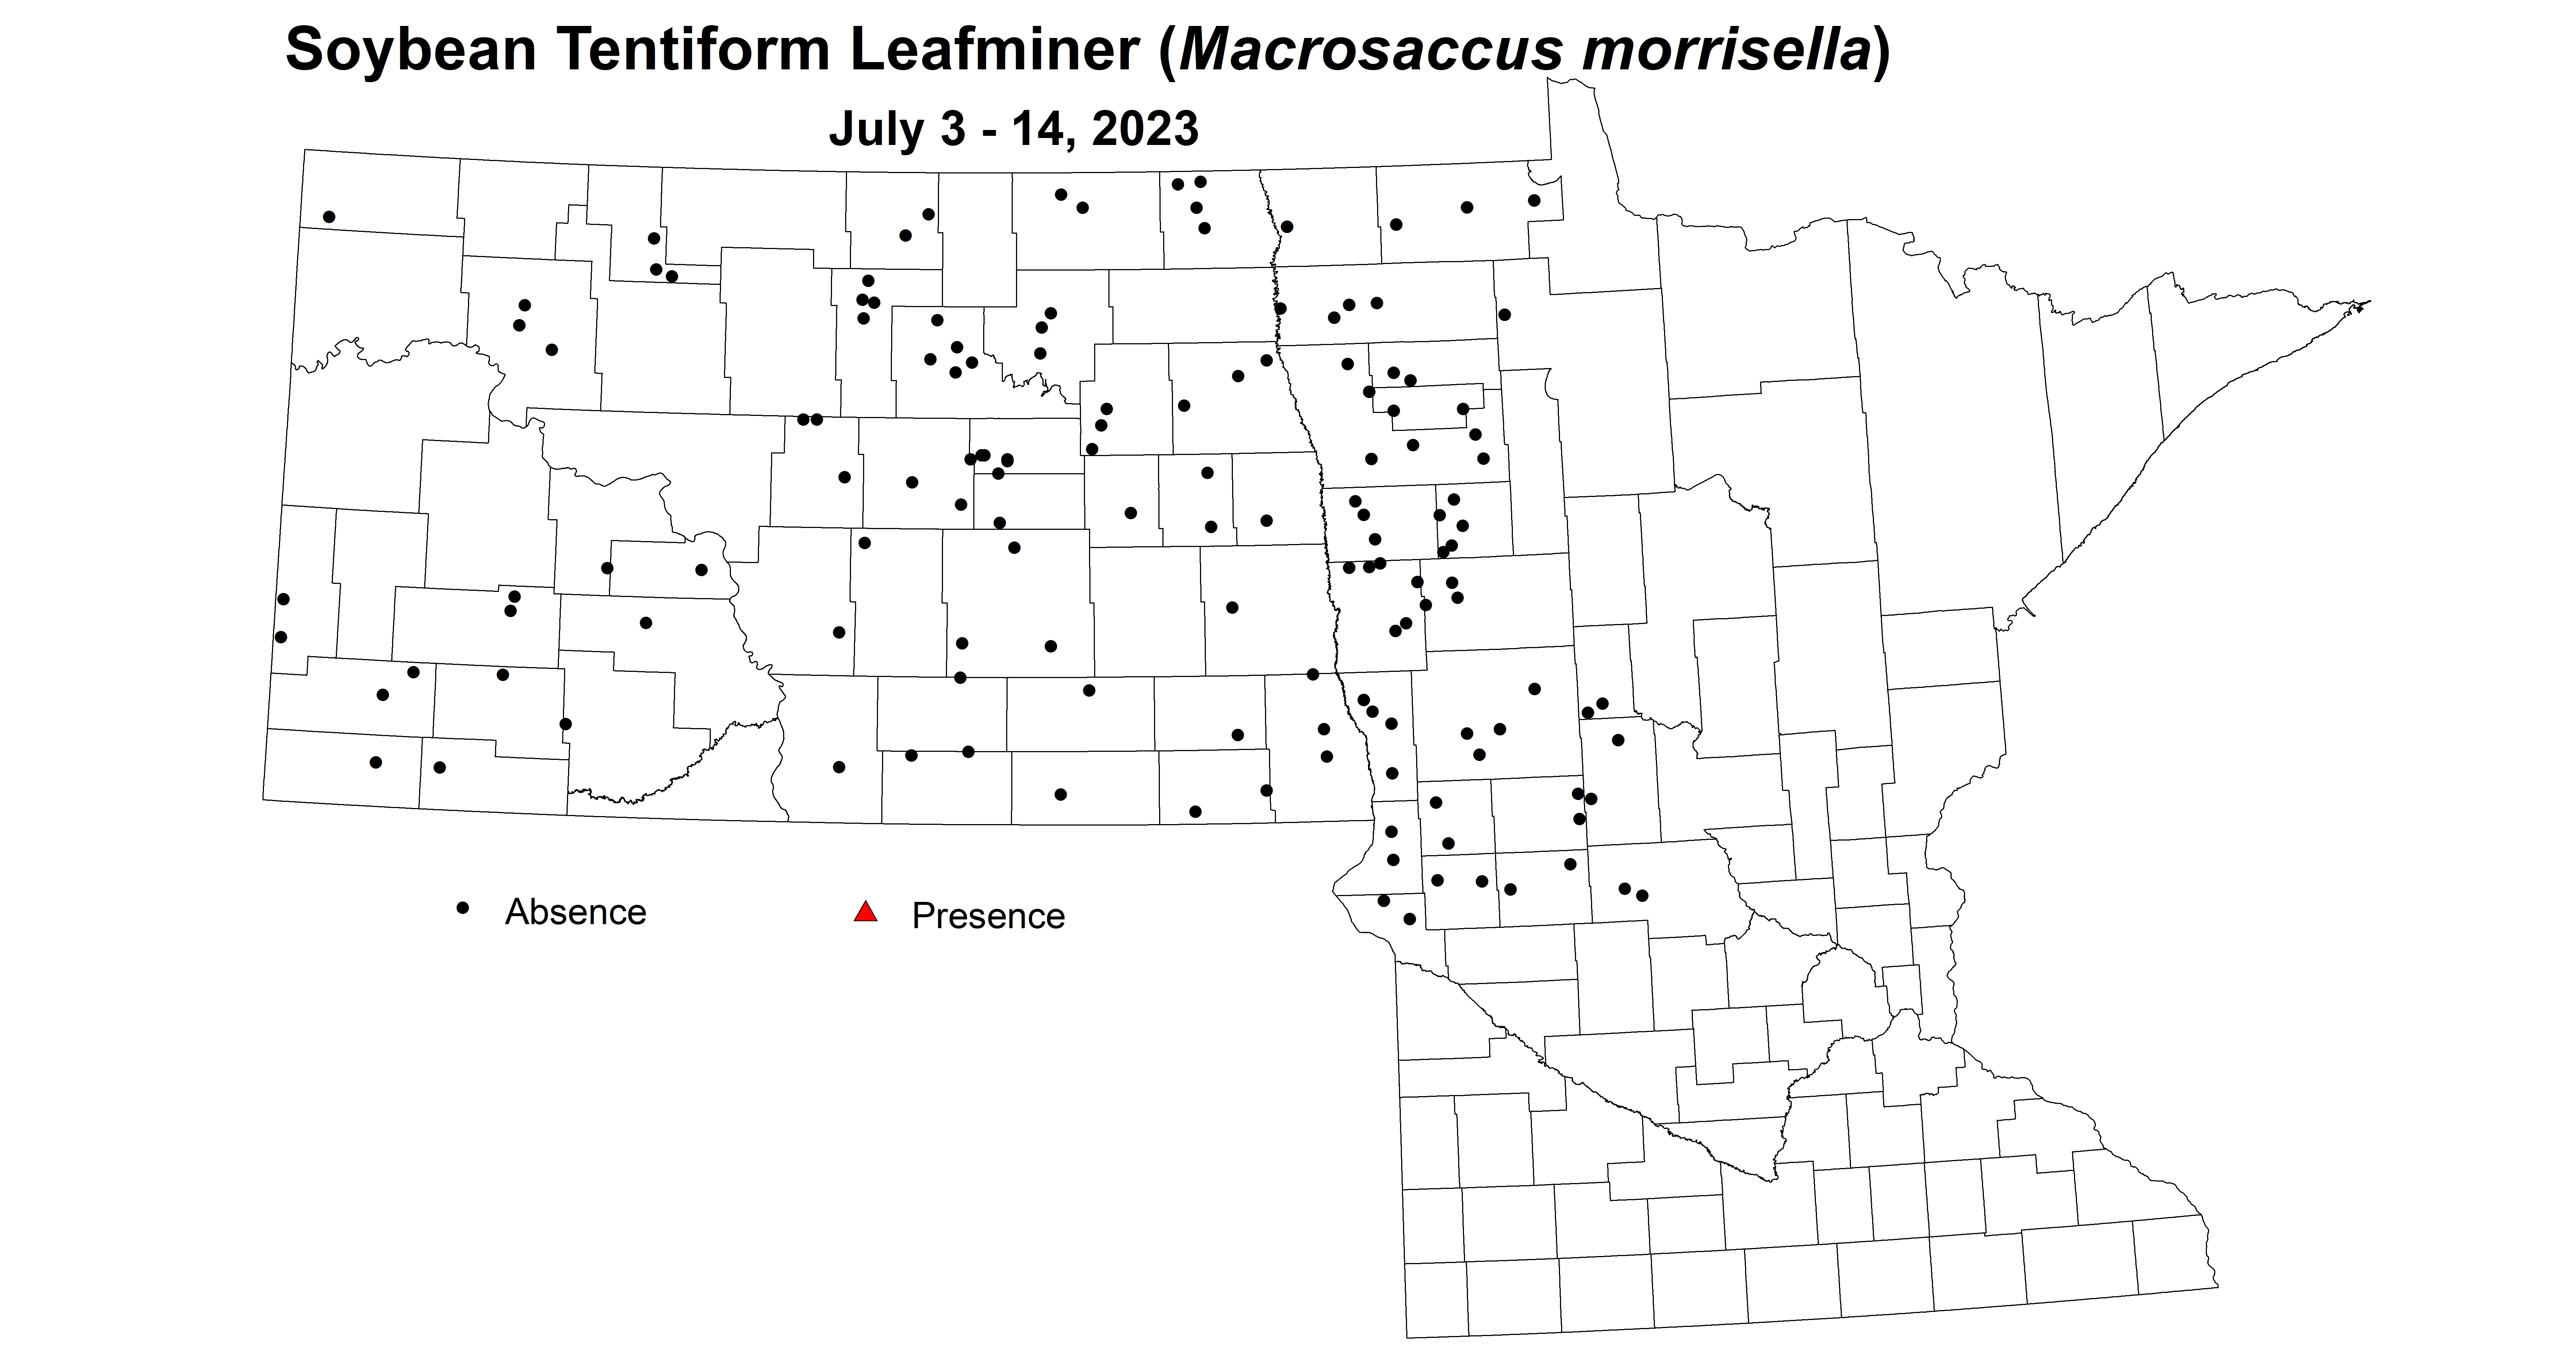 soybean tentiform leafminer July 3-14 2023 corrected